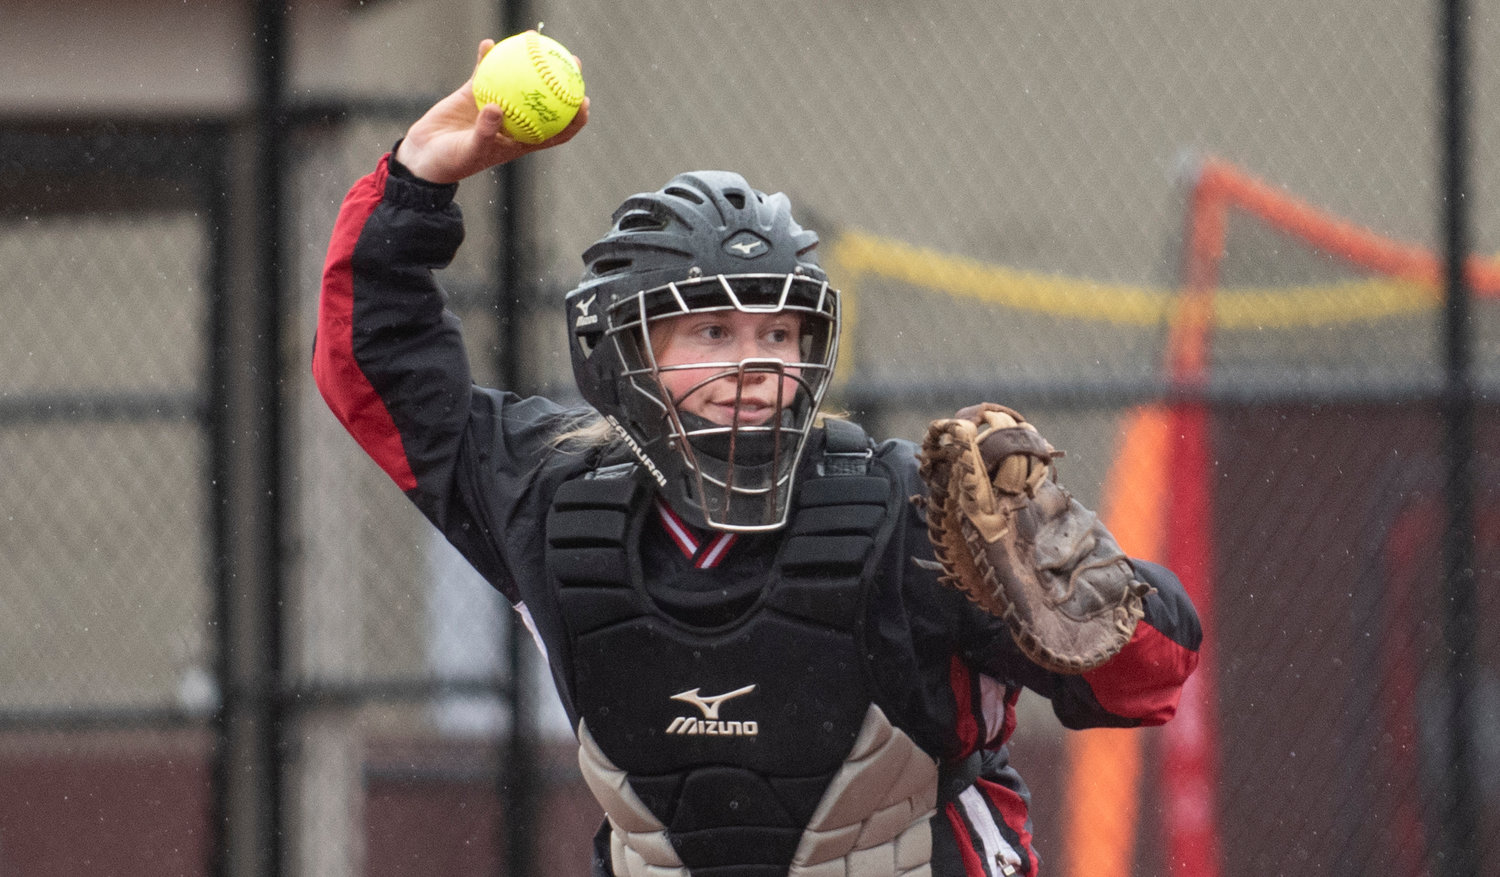 Mossyrock catcher Trista Rockwood throws a runner out at first on Saturday in Montesano.